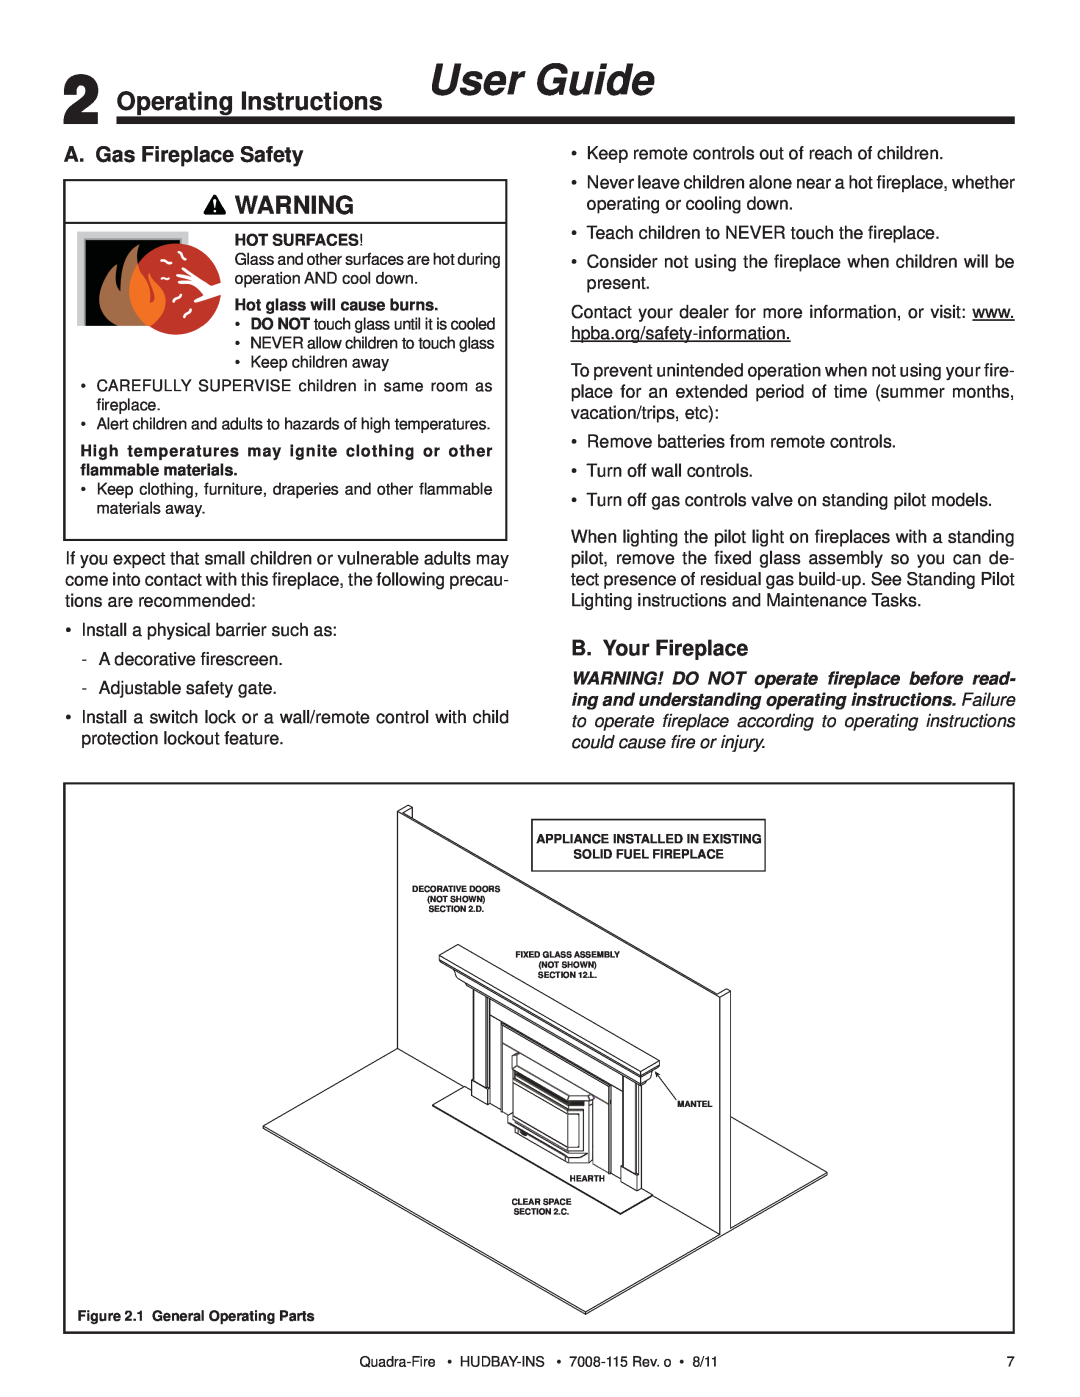 Quadra-Fire 7008-115 owner manual Operating Instructions User Guide, A. Gas Fireplace Safety, B. Your Fireplace 